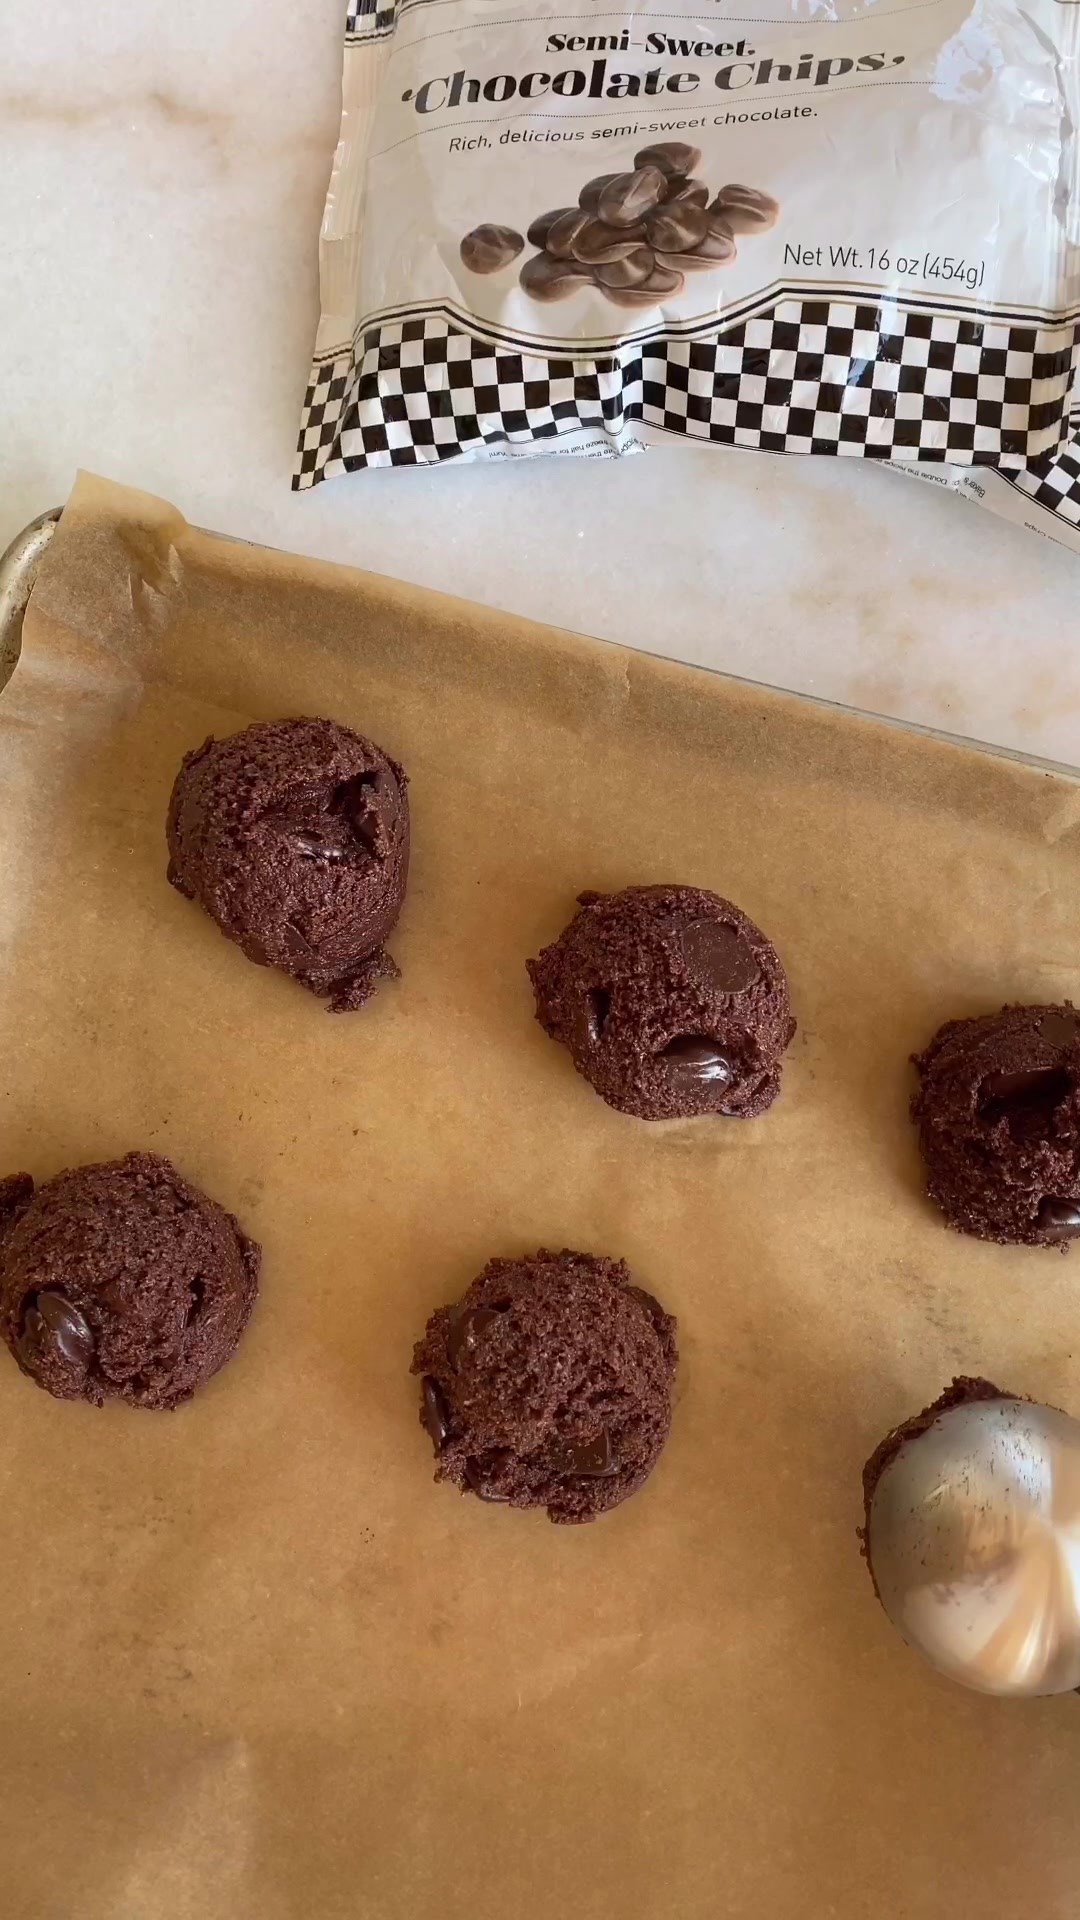 Baked See’s Double Chocolate Chip Cookies in celebration of #NationalHomemadeCookiesDay 🍪🍫🤤 These homemade cookies are 100% gluten-free 🖤 INGREDIENTS